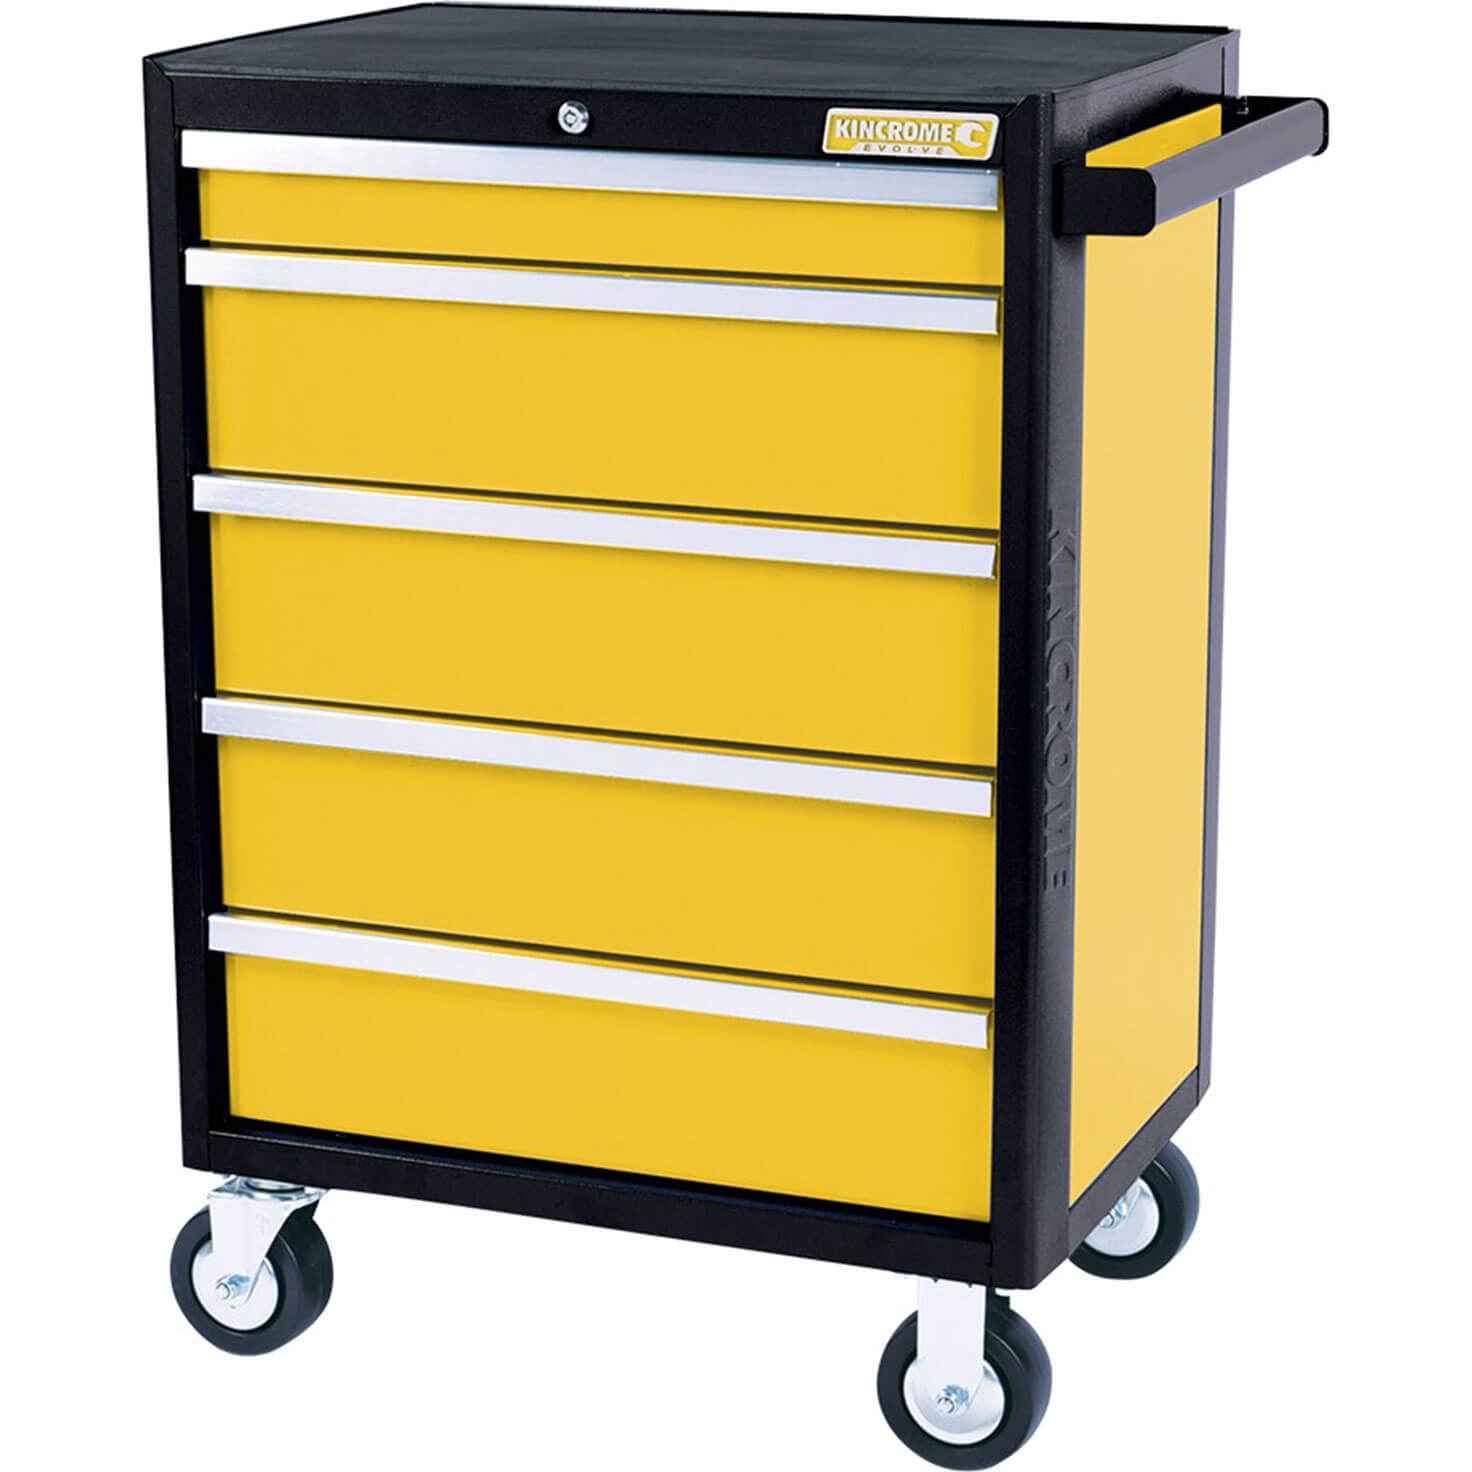 Image of Kincrome Evolve 5 Drawer Tool Roller Cabinet Yellow